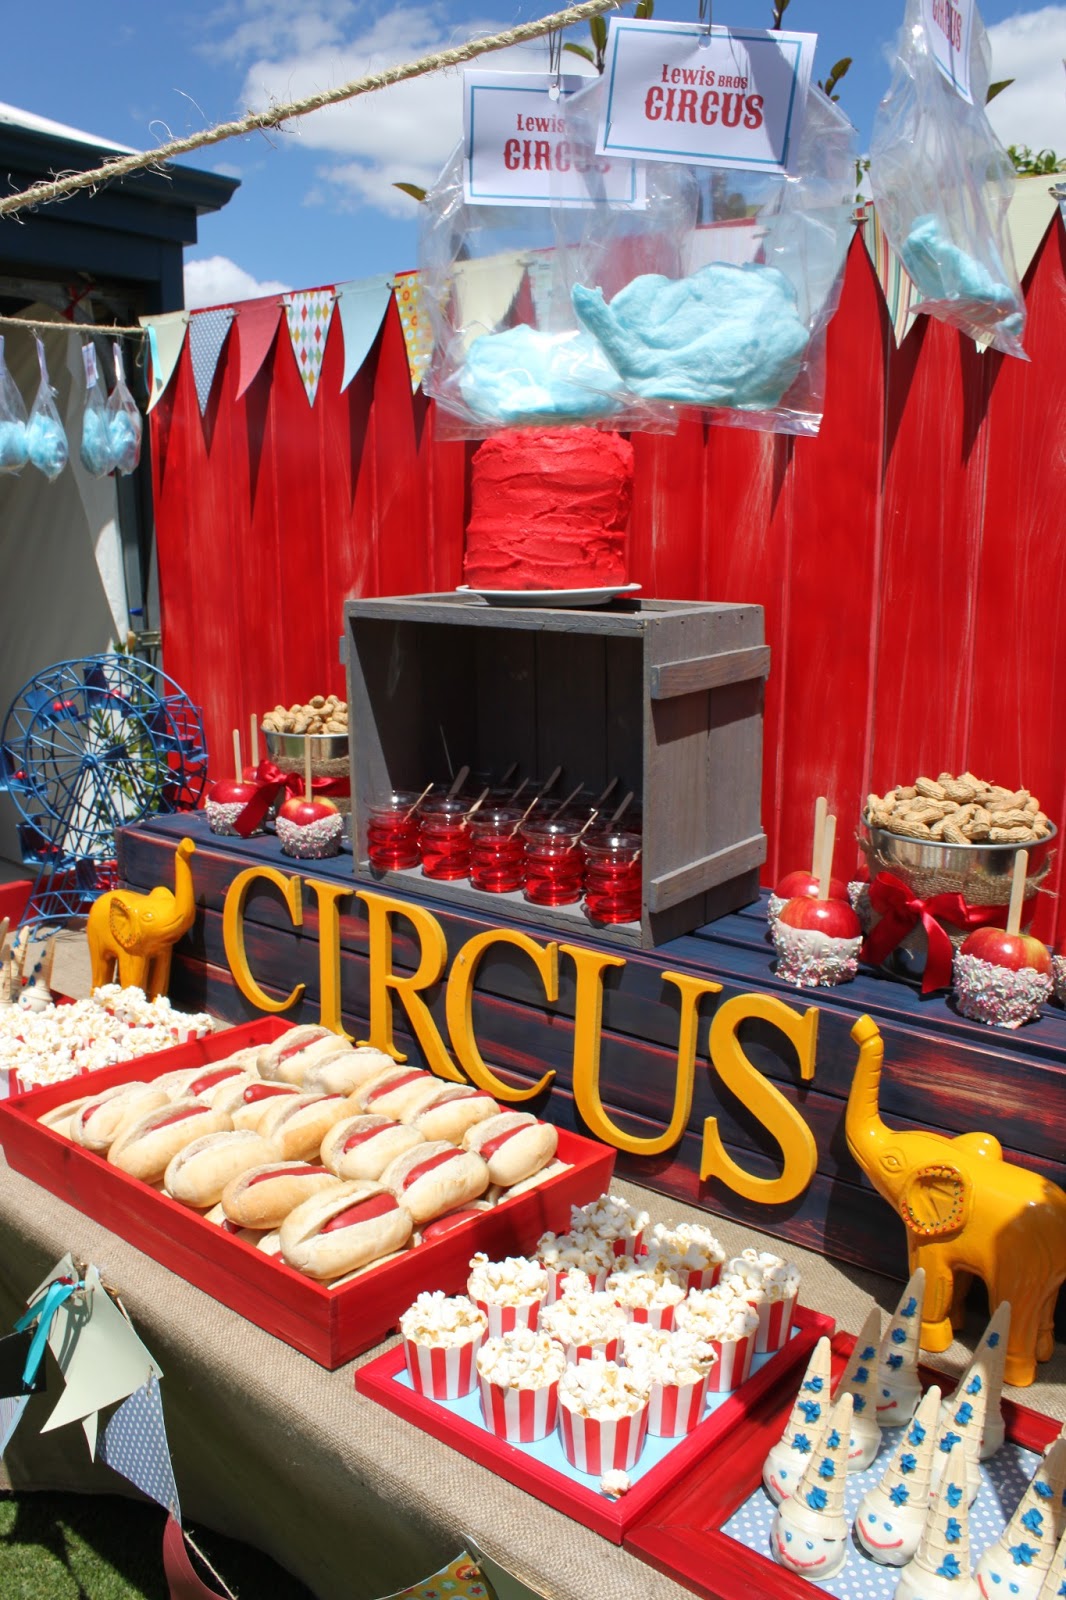 Piece of Cake Vintage Circus Real Party Feature!